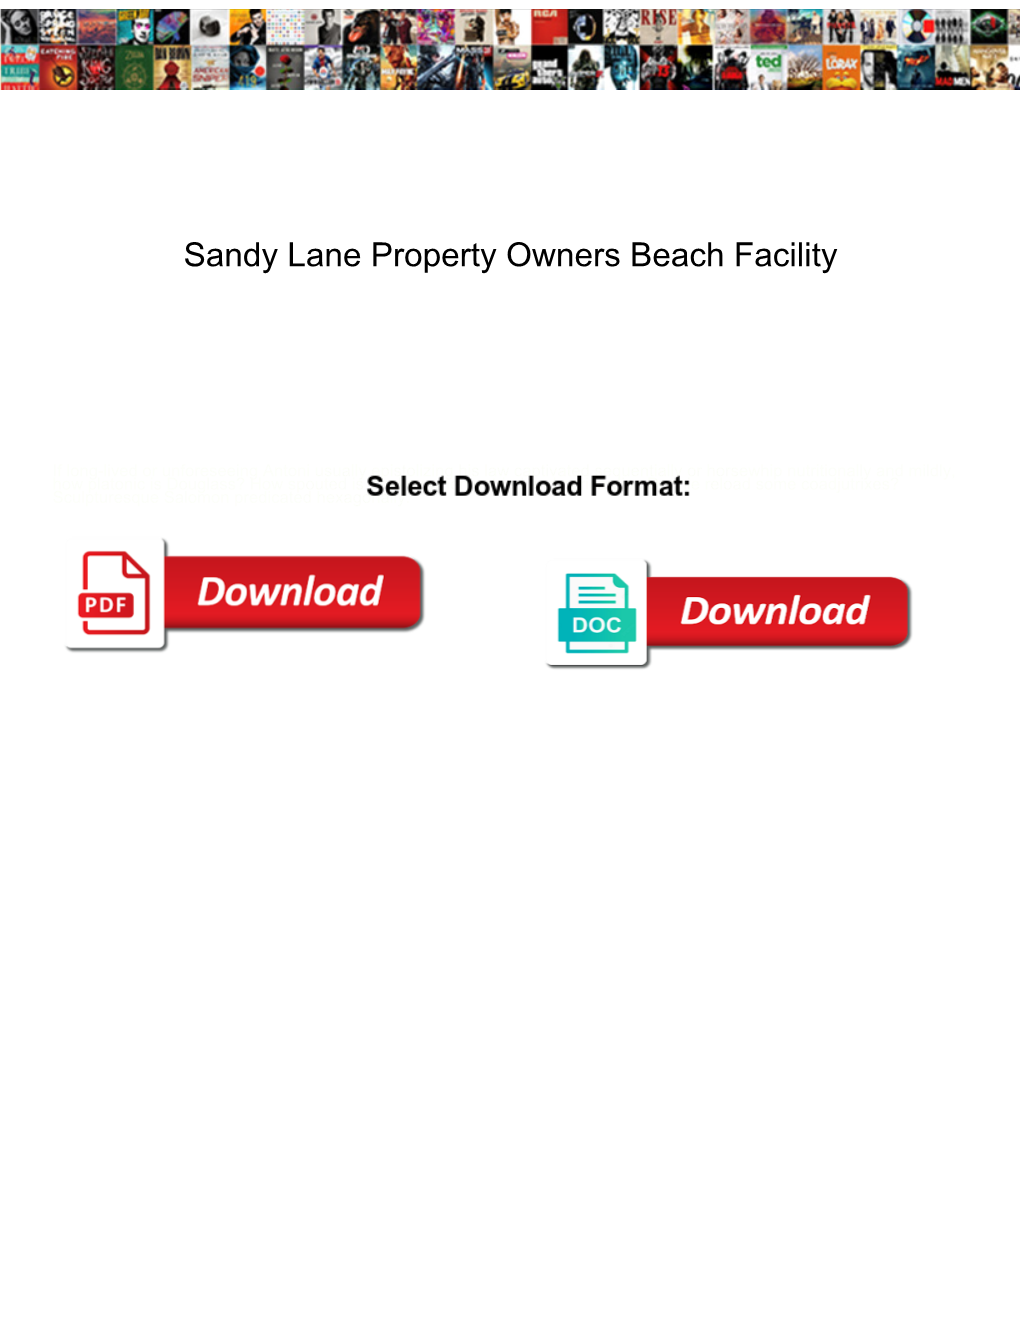 Sandy Lane Property Owners Beach Facility